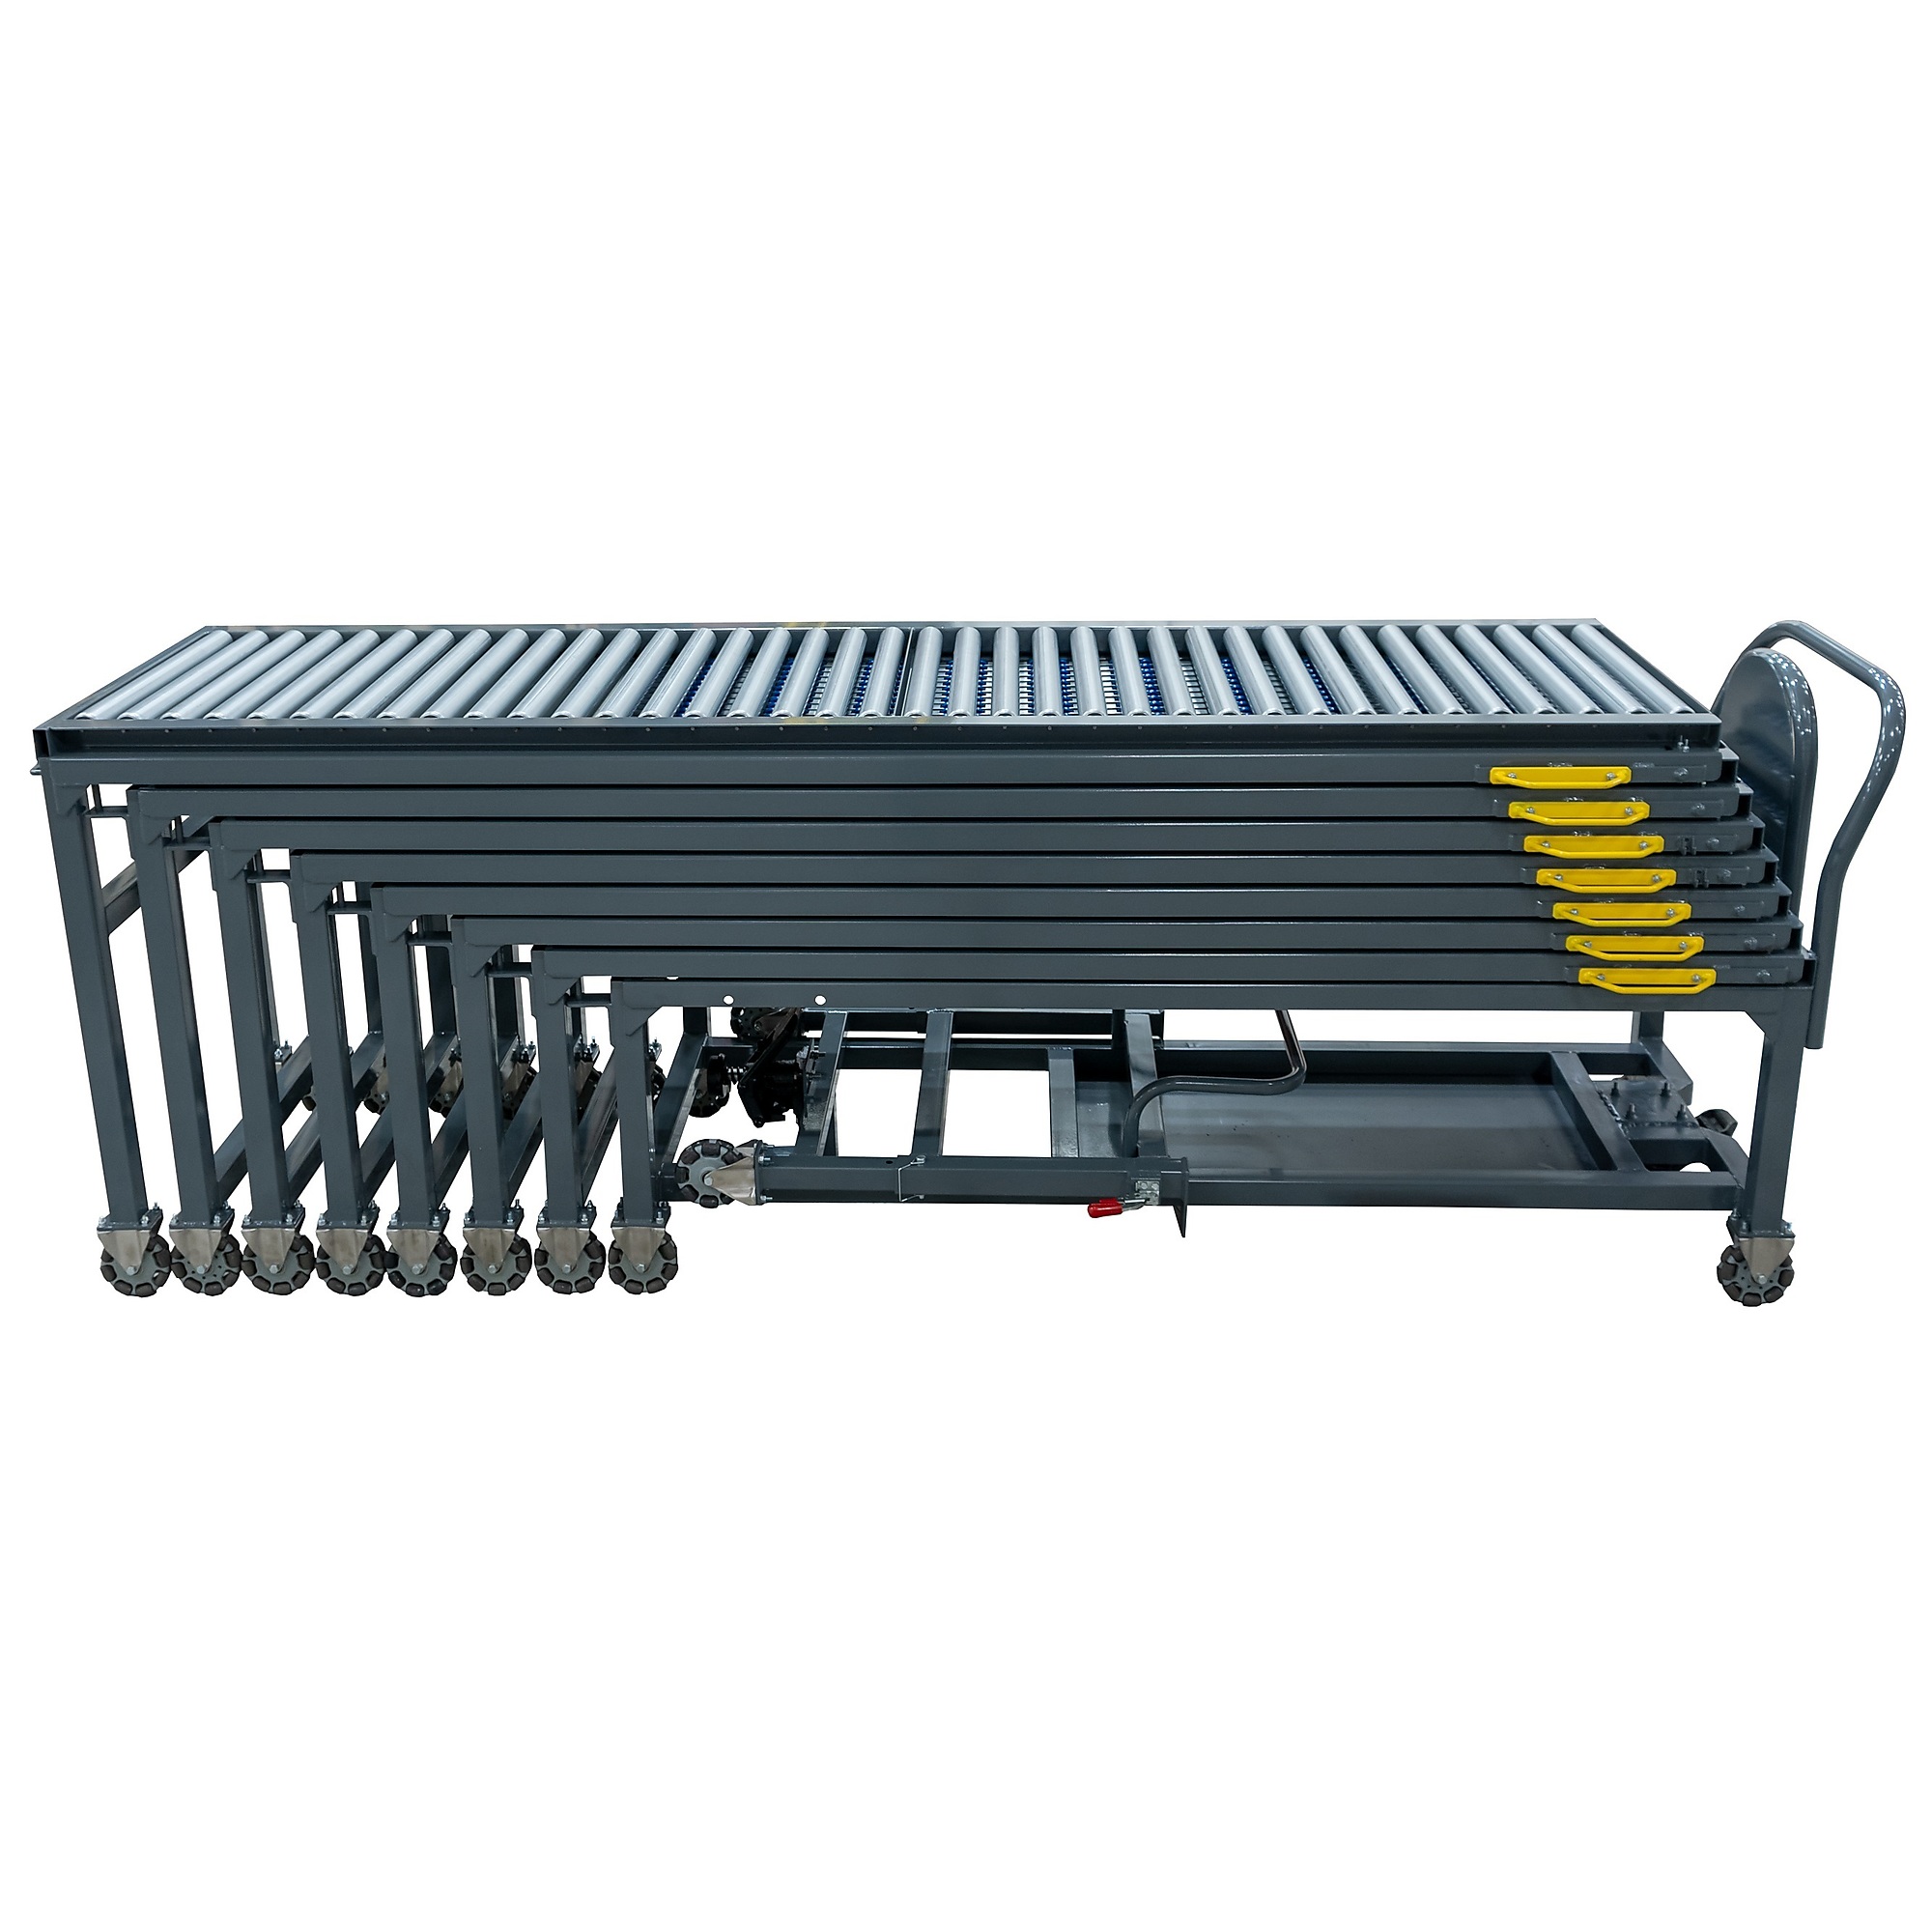 Ballymore, Conveyor Table - Extends from 10ft. up to 63ft. Long, Capacity 100 lb, Conveyor Length 750 in, Model BEXCONV-60